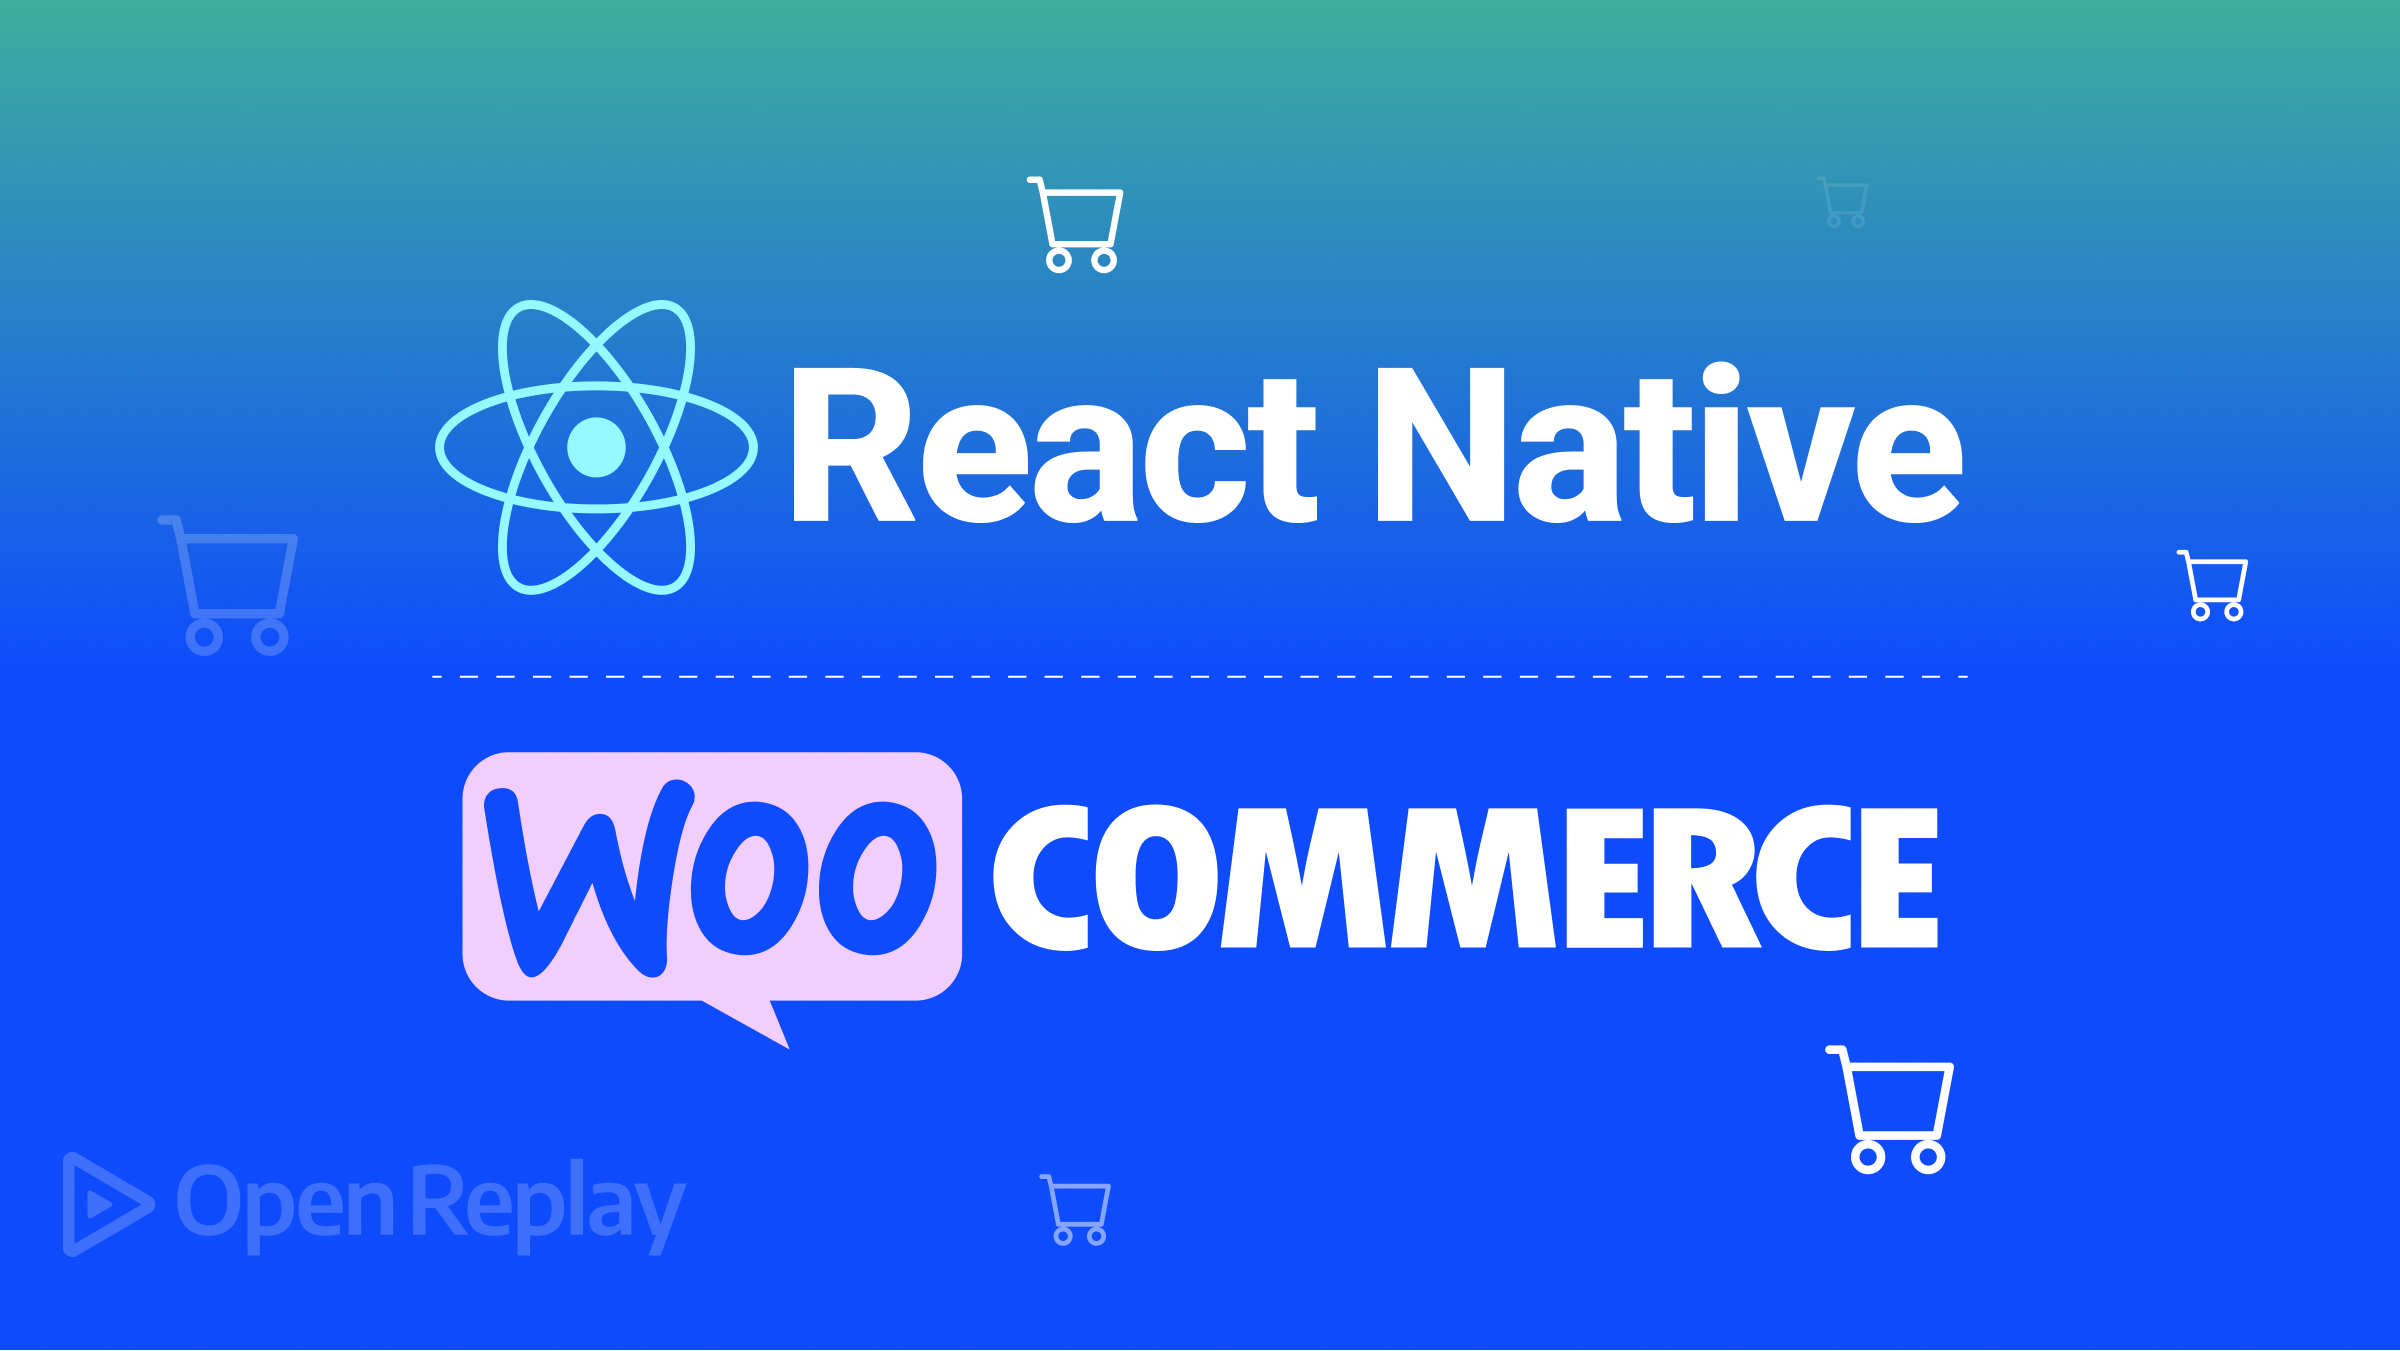 Building an eCommerce Mobile App with React Native and WooCommerce